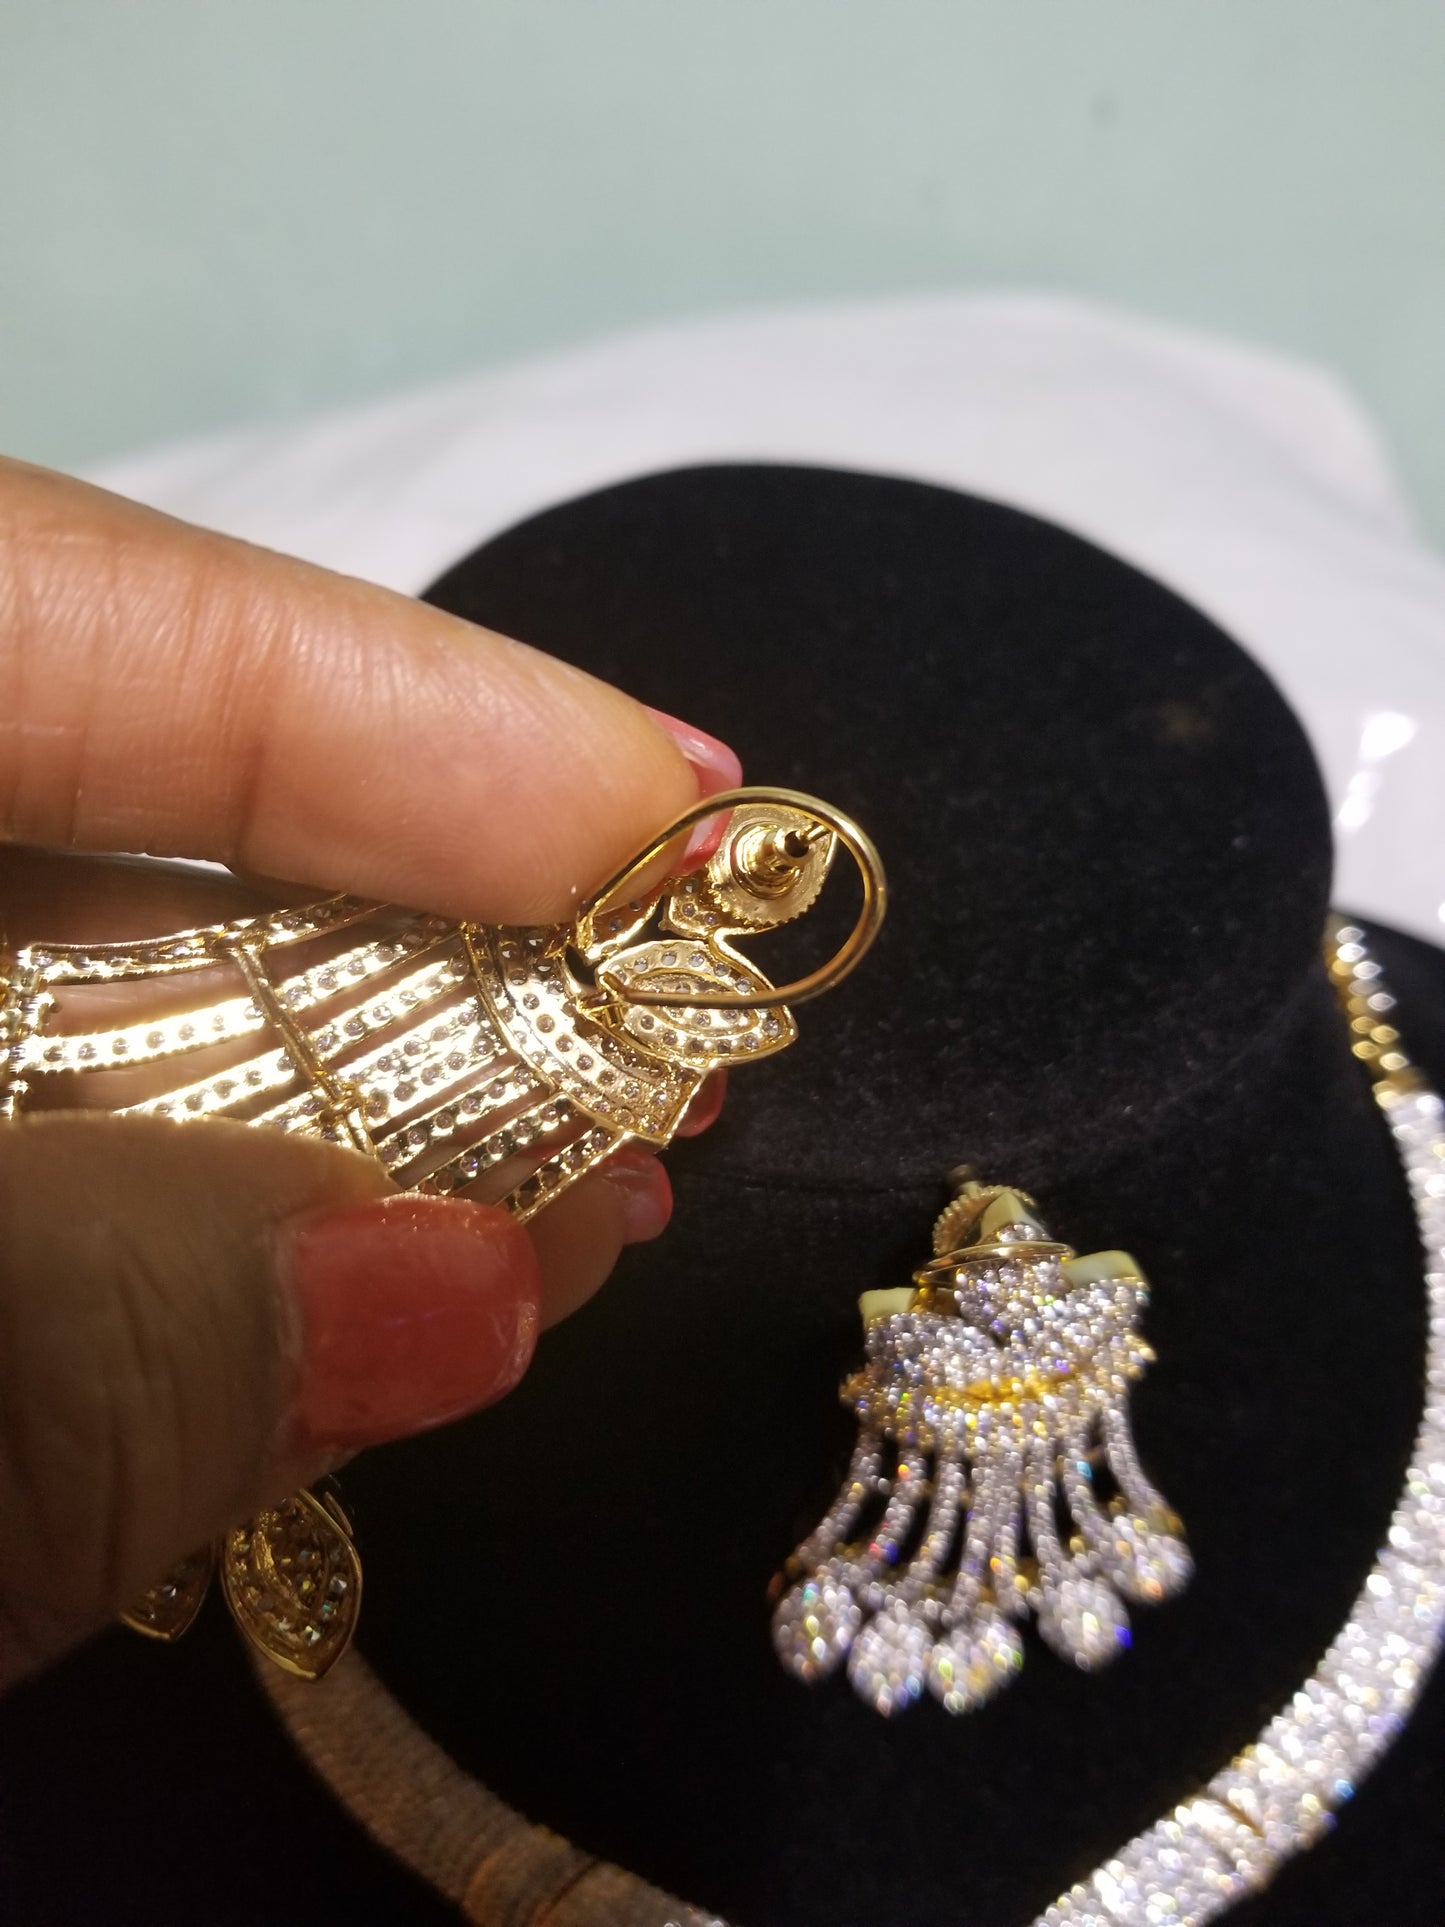 Sale: New arrival Celebrants 4pcs Bridal set: 22k  Electroplated with dazzling white/gold CZ stones setting. Bridal piece of accessories, hypoallergenic. Necklace, earrings, ring Is open for finger adjustment and a matching bangle set.